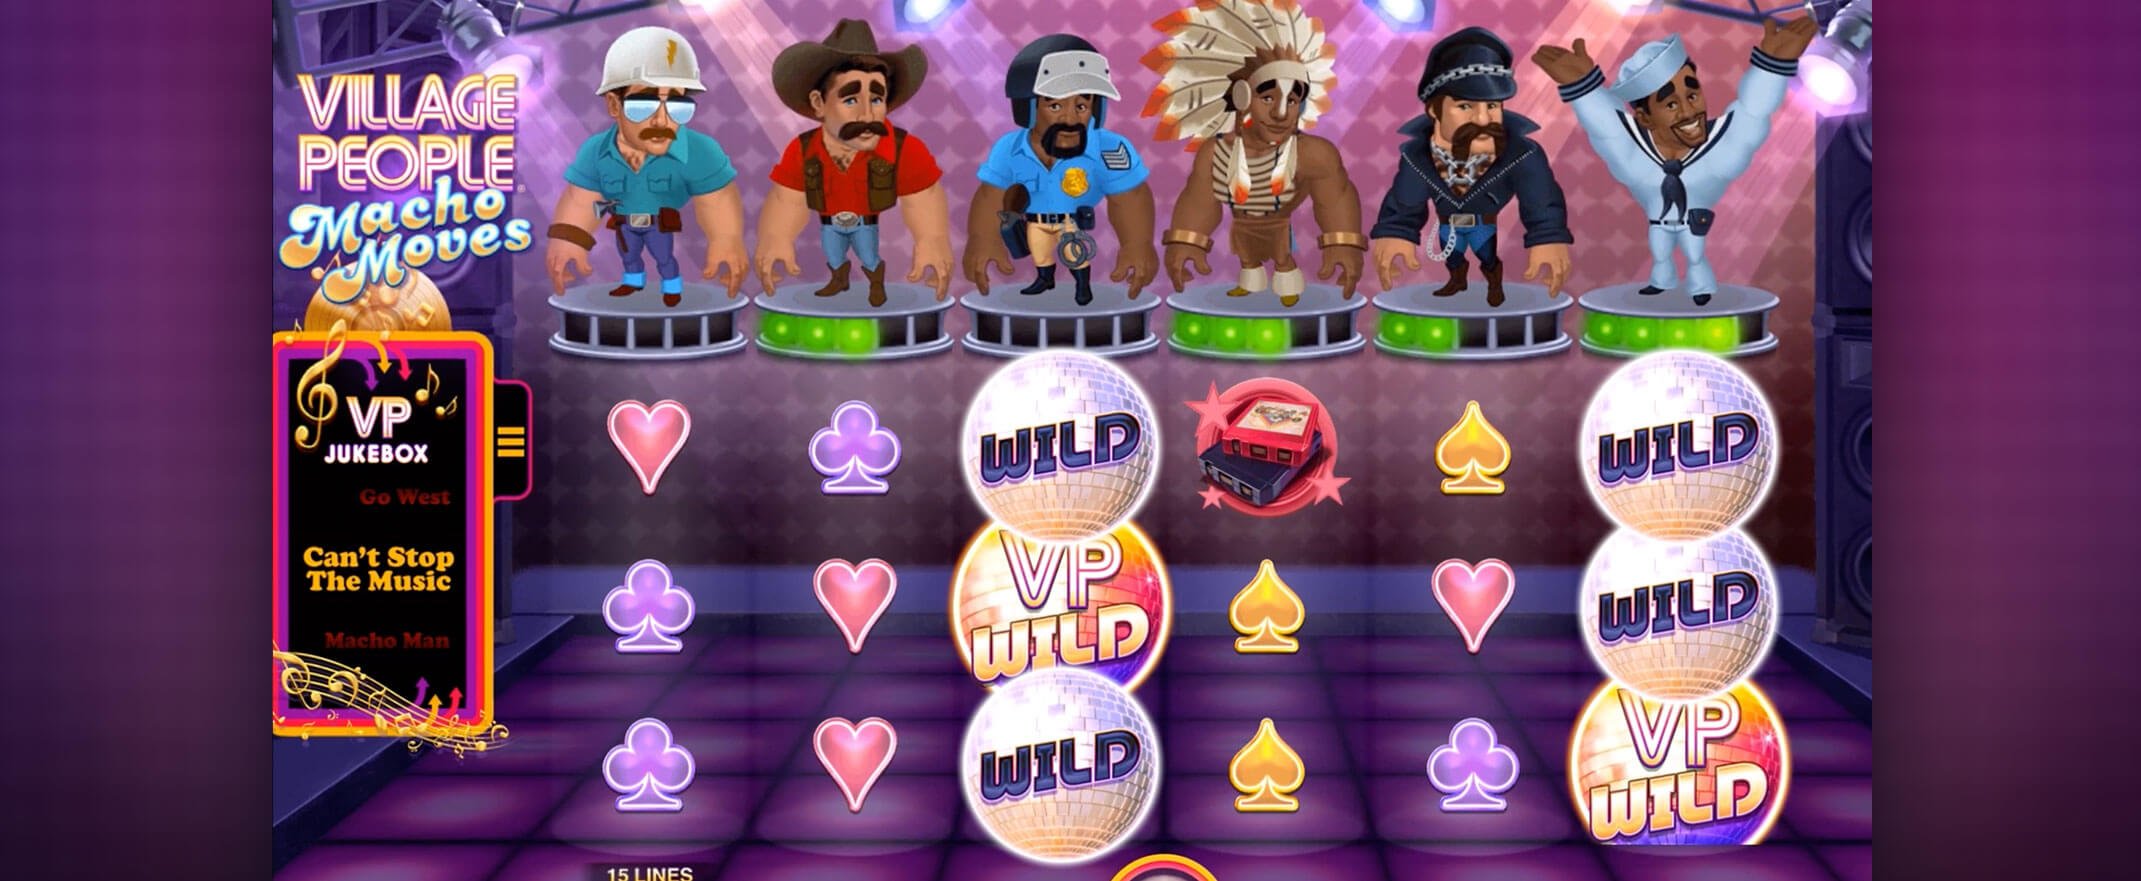 Village People Macho Moves slot from Microgaming